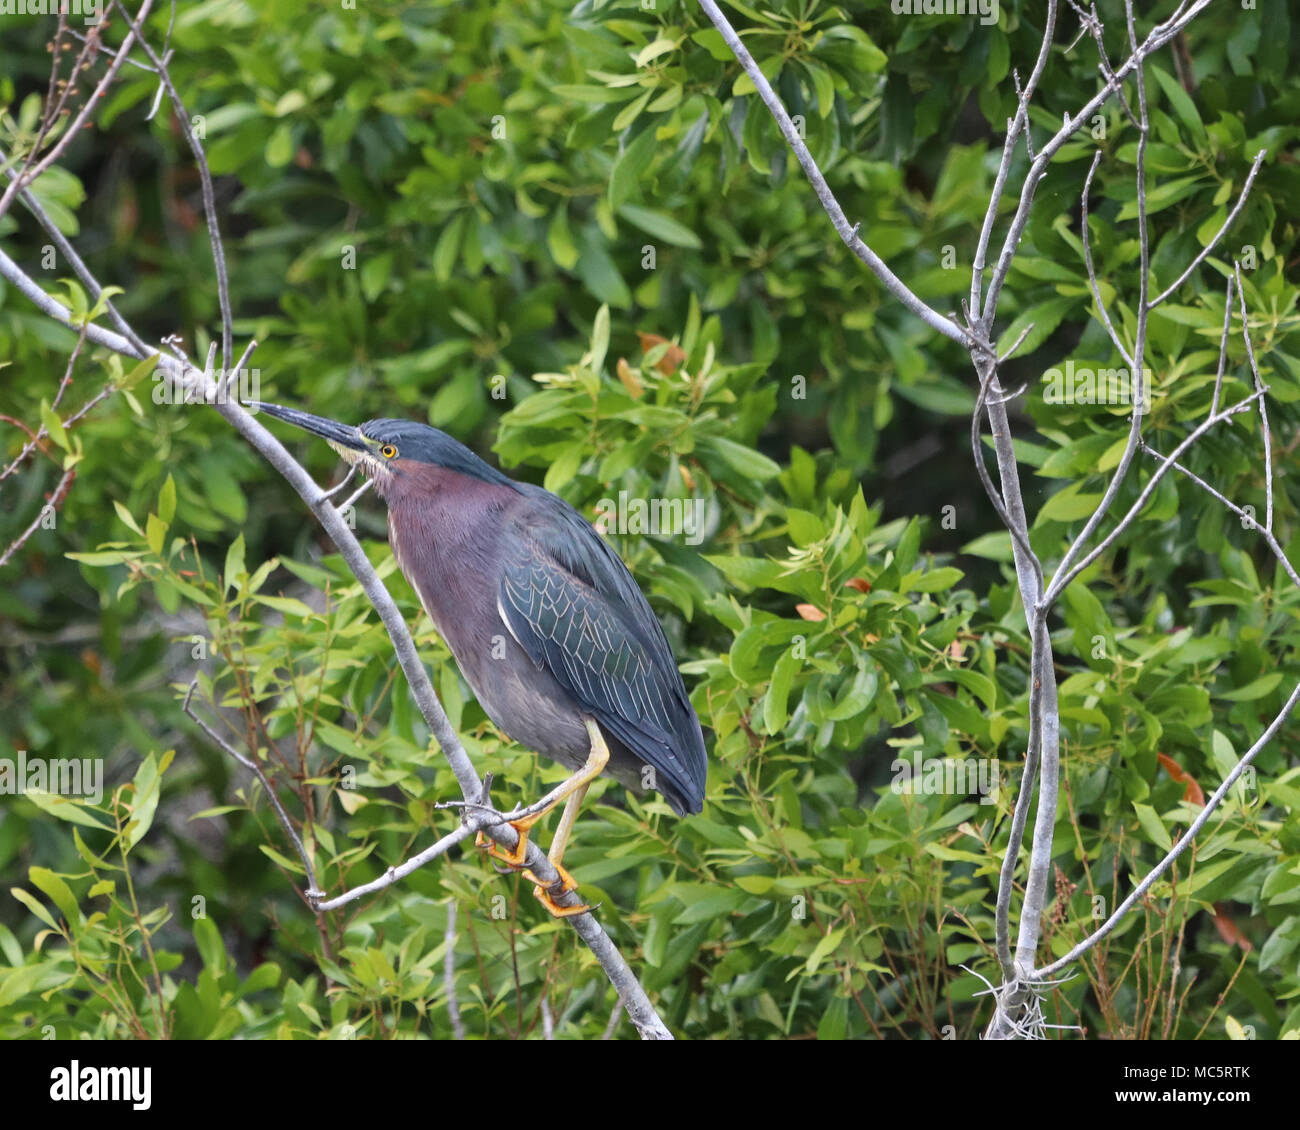 Green Heron (Butorides virescens) perched in tree along the Rainbow River in Dunnellon, Florida Stock Photo